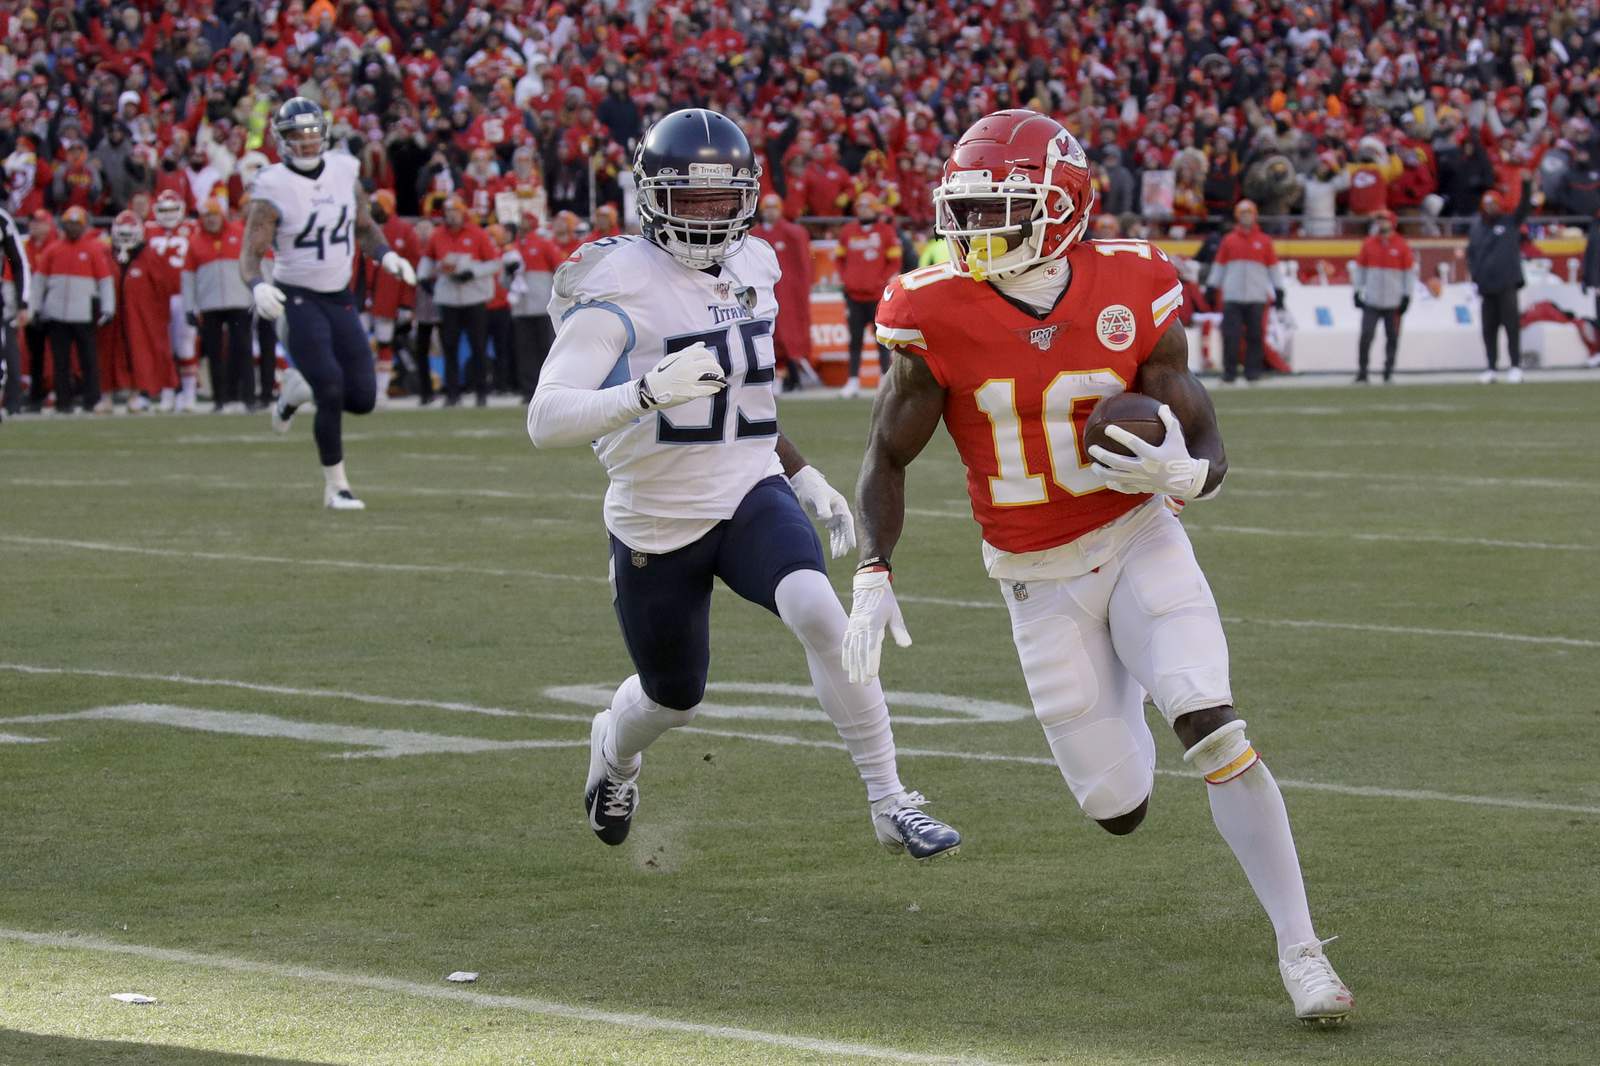 Kansas City Chiefs advance to first Super Bowl in 50 years, beating Tennessee Titans 35-24 in AFC title game